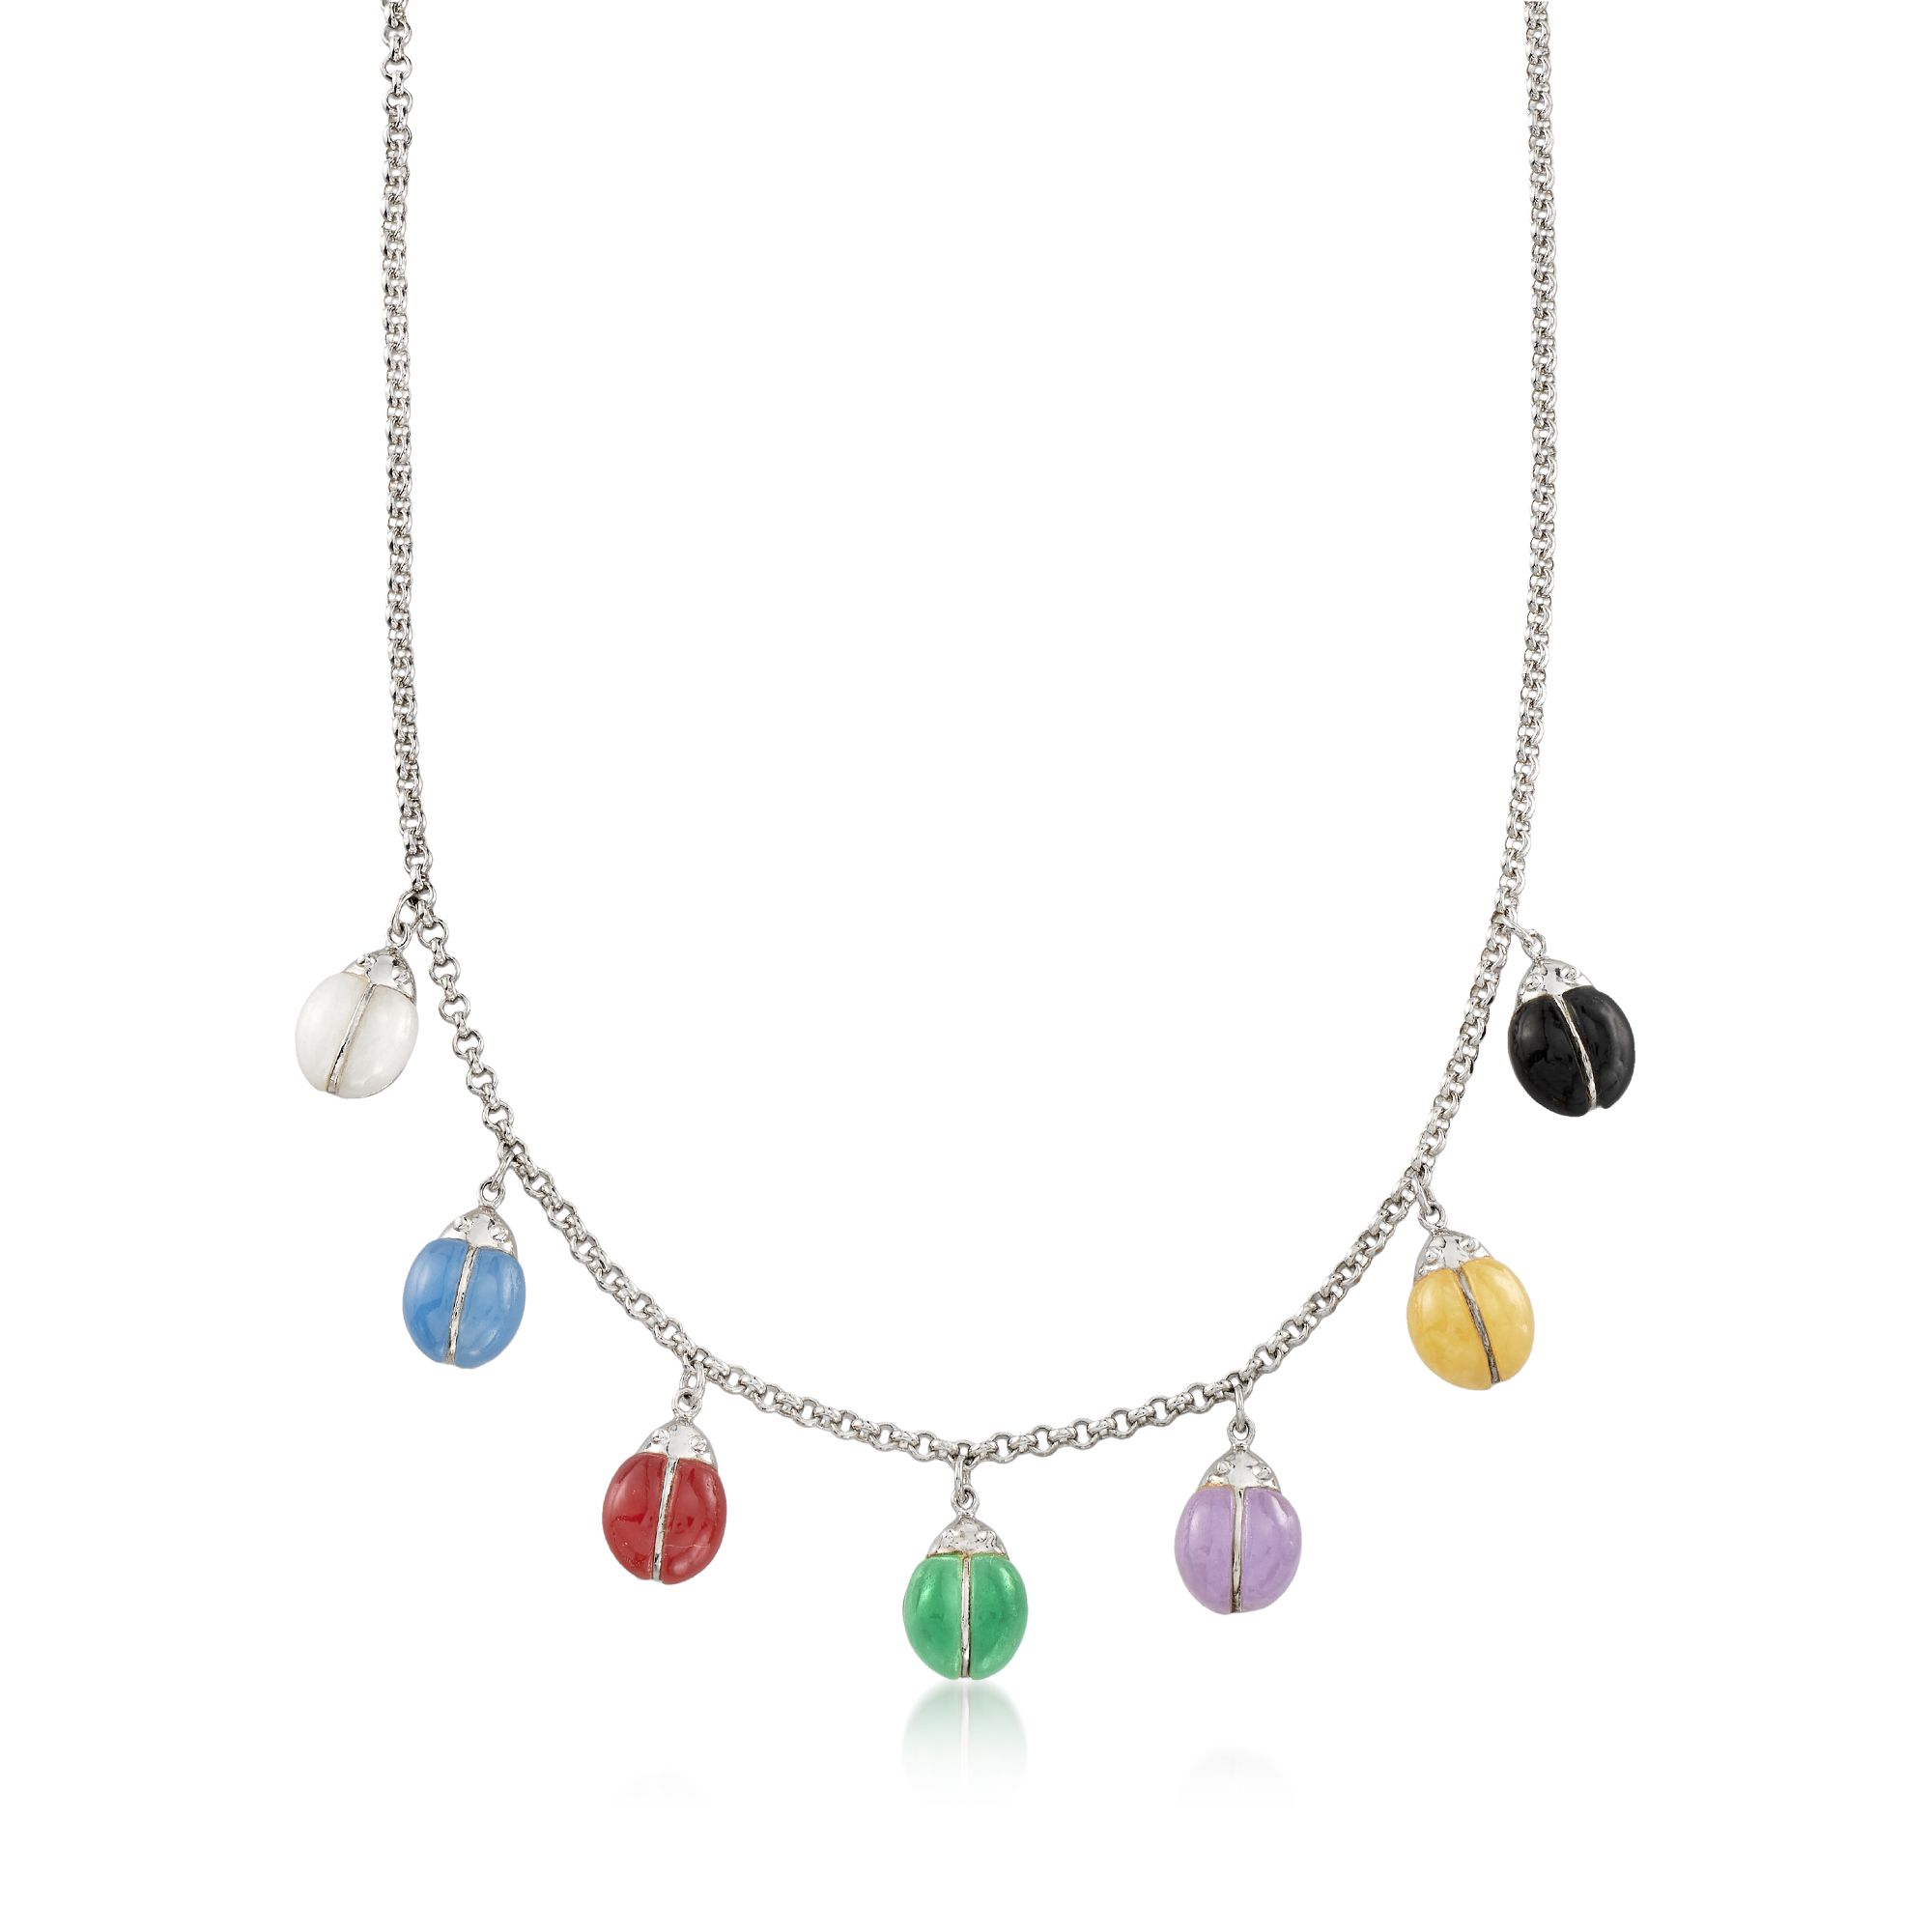 9mm Multicolored Jade Ladybug Necklace in Sterling Silver | Ross-Simons